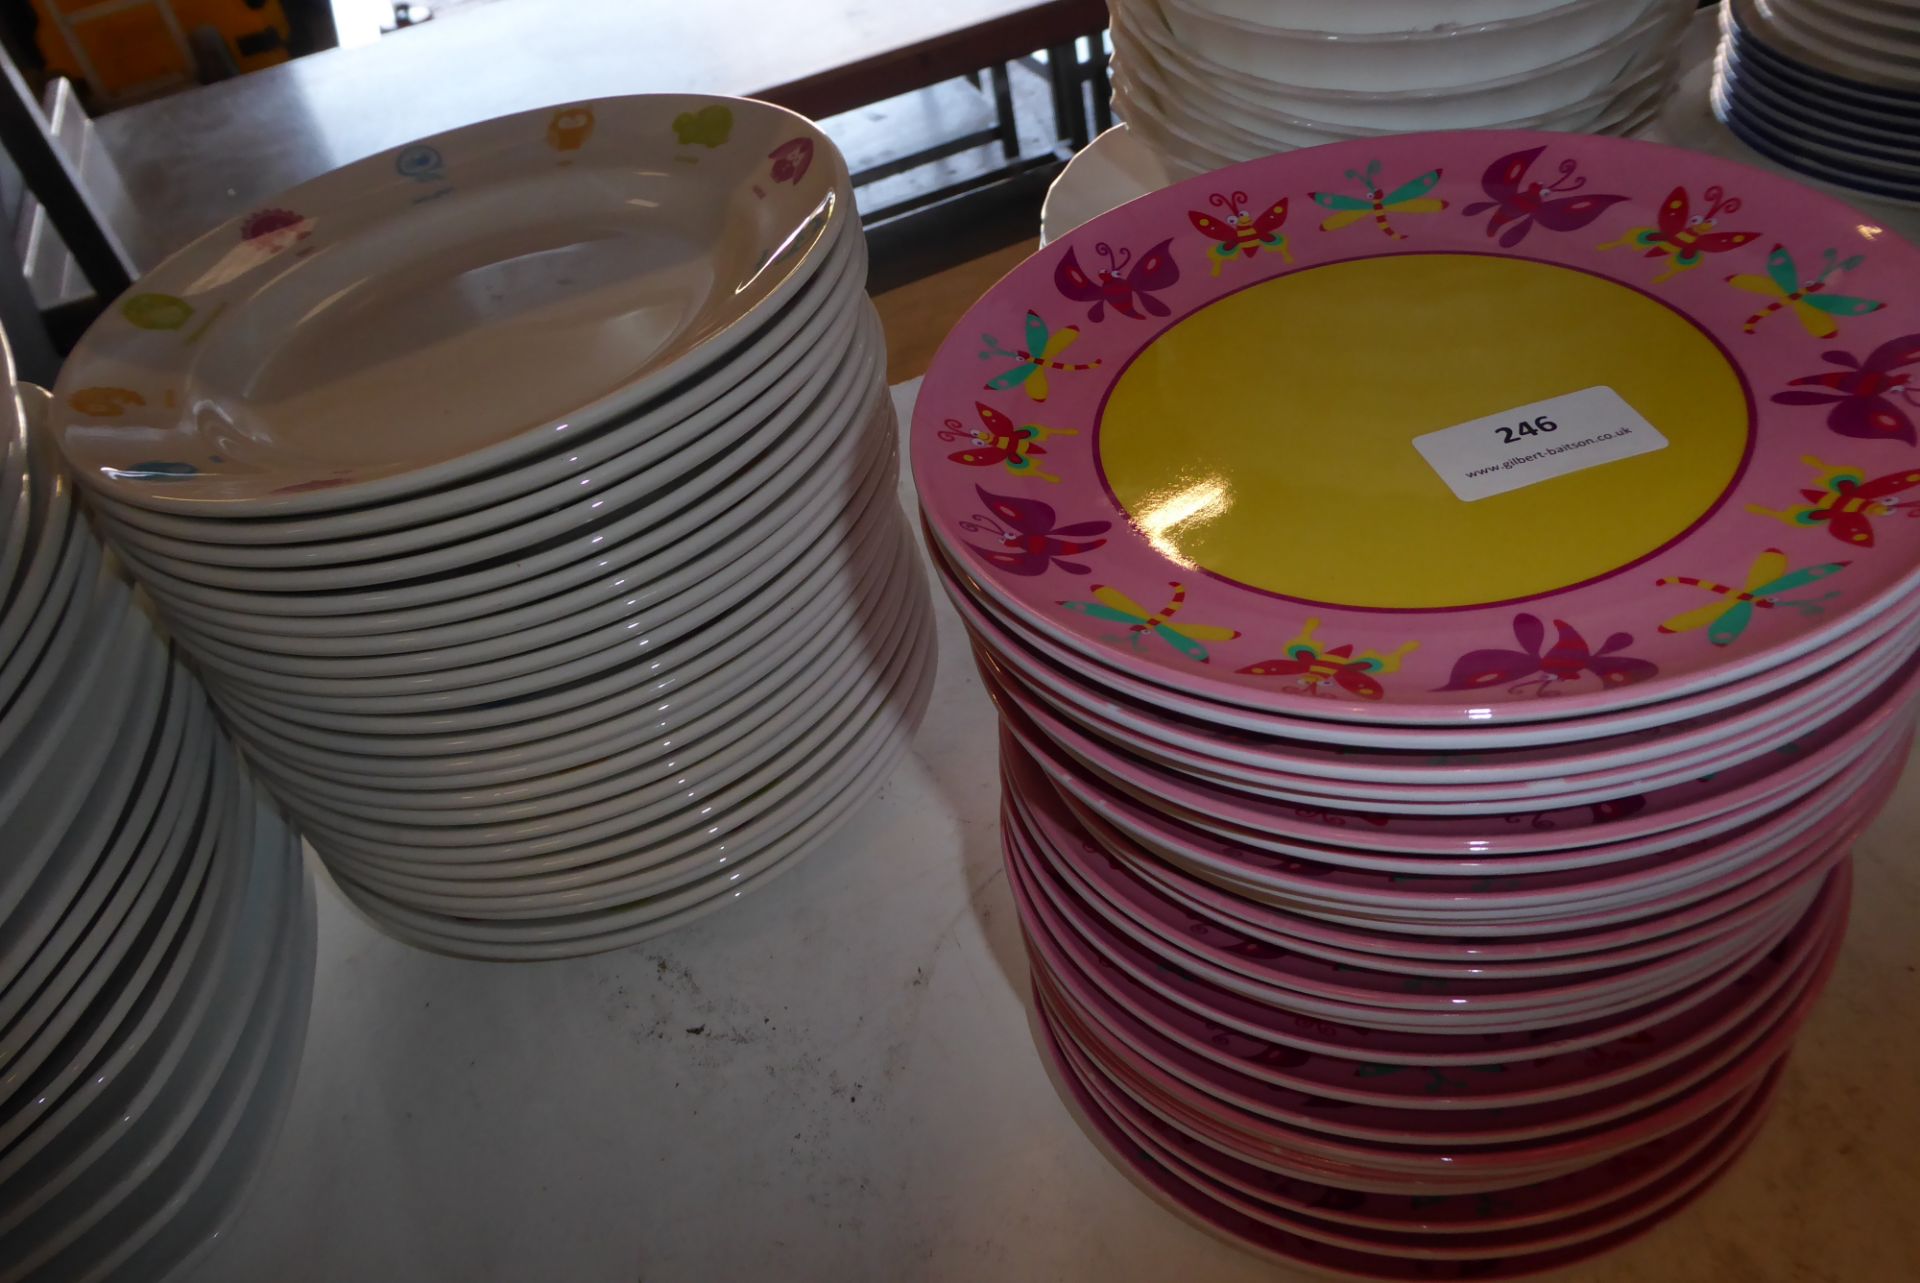 * approx. 25 x kids shallow bowls and 25 x plastic side plates